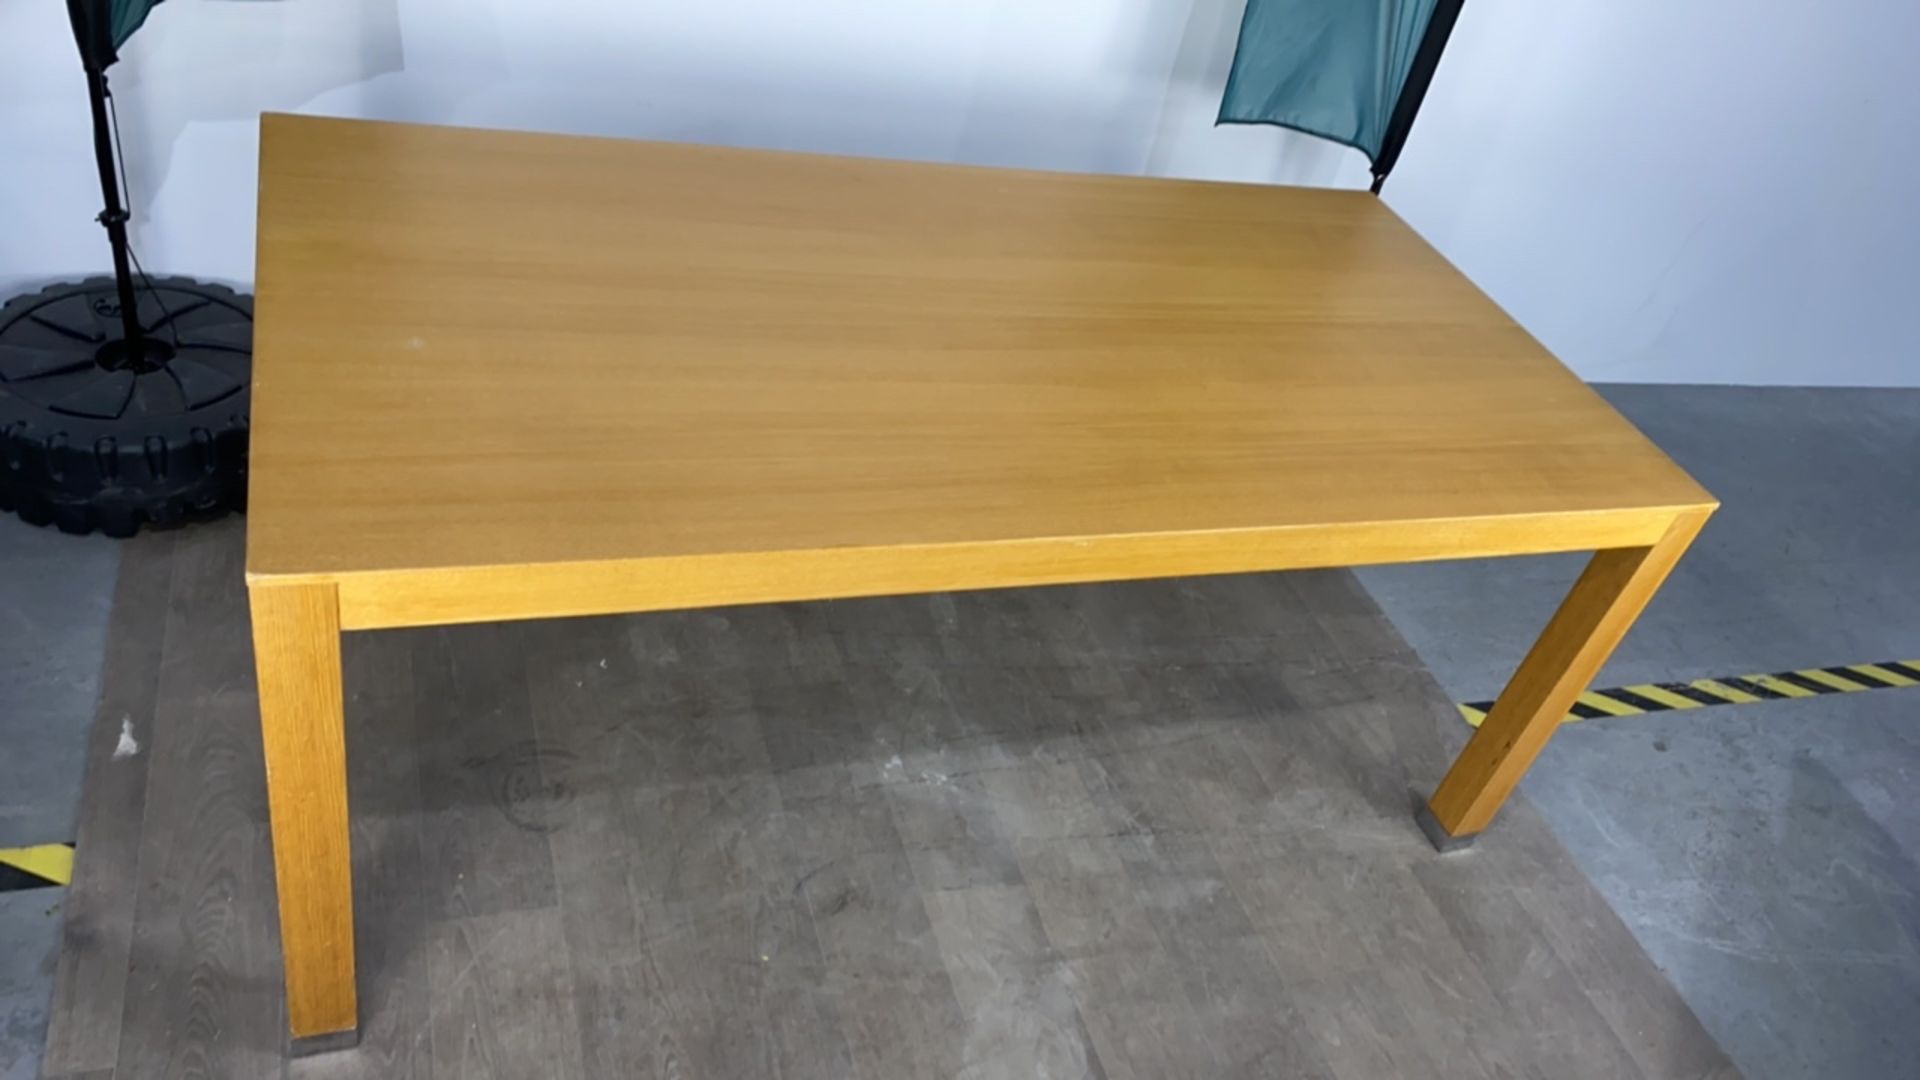 Large Wooden Table With Chromed Feet - Image 3 of 8